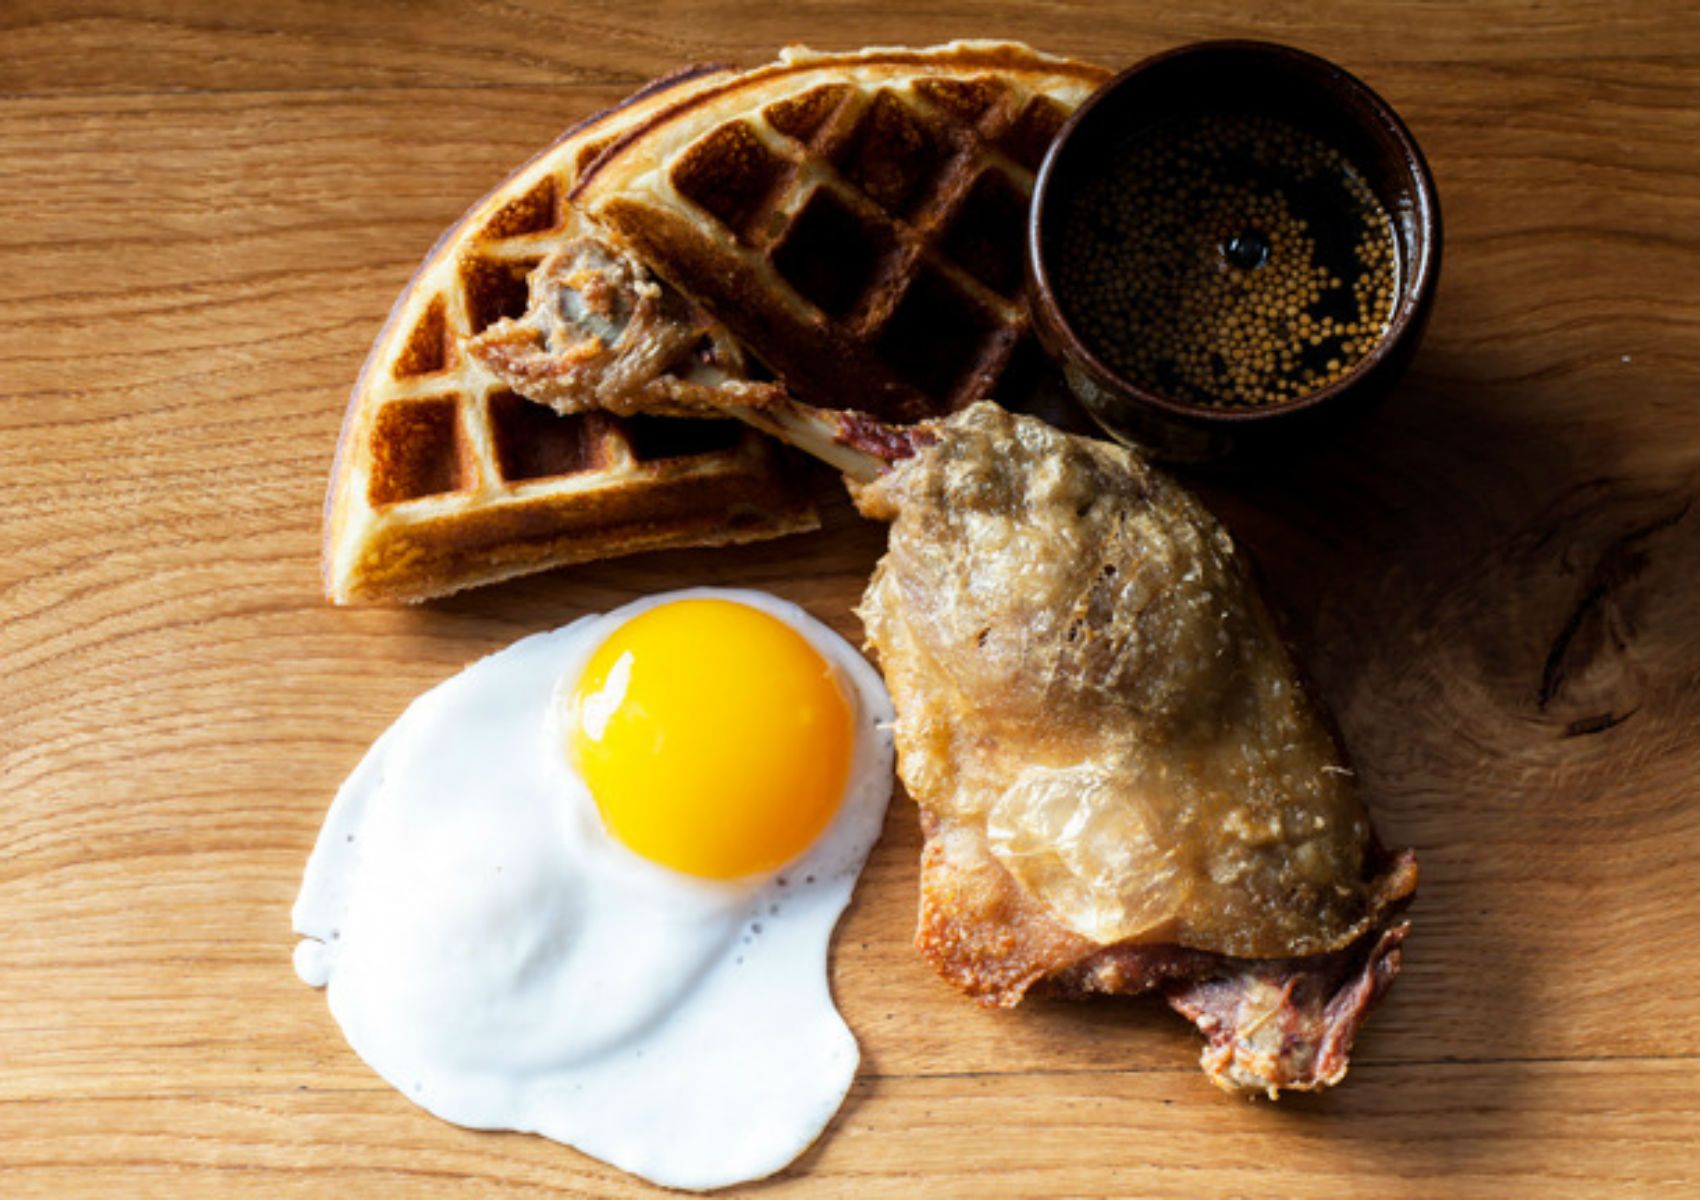 Duck and Waffle from the Duck and Waffle Restaurant